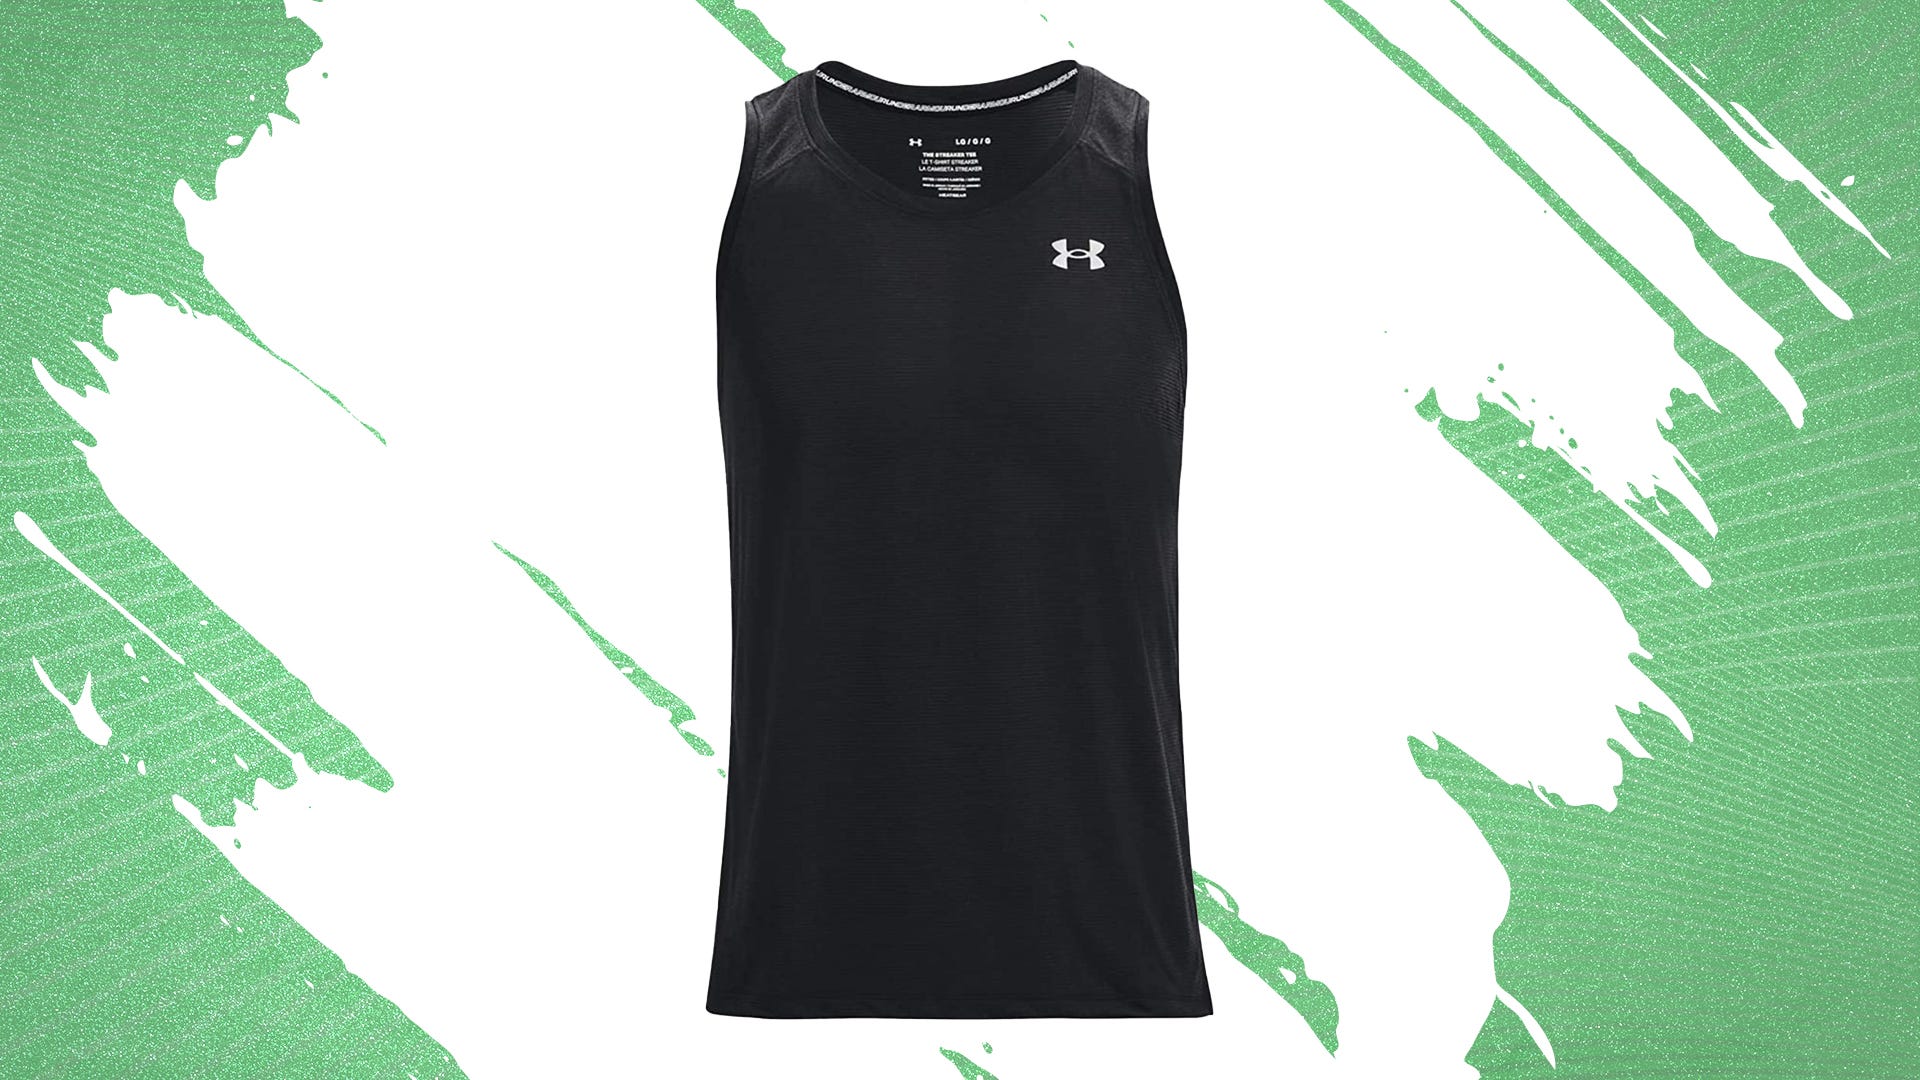 Under Armour muscle tank